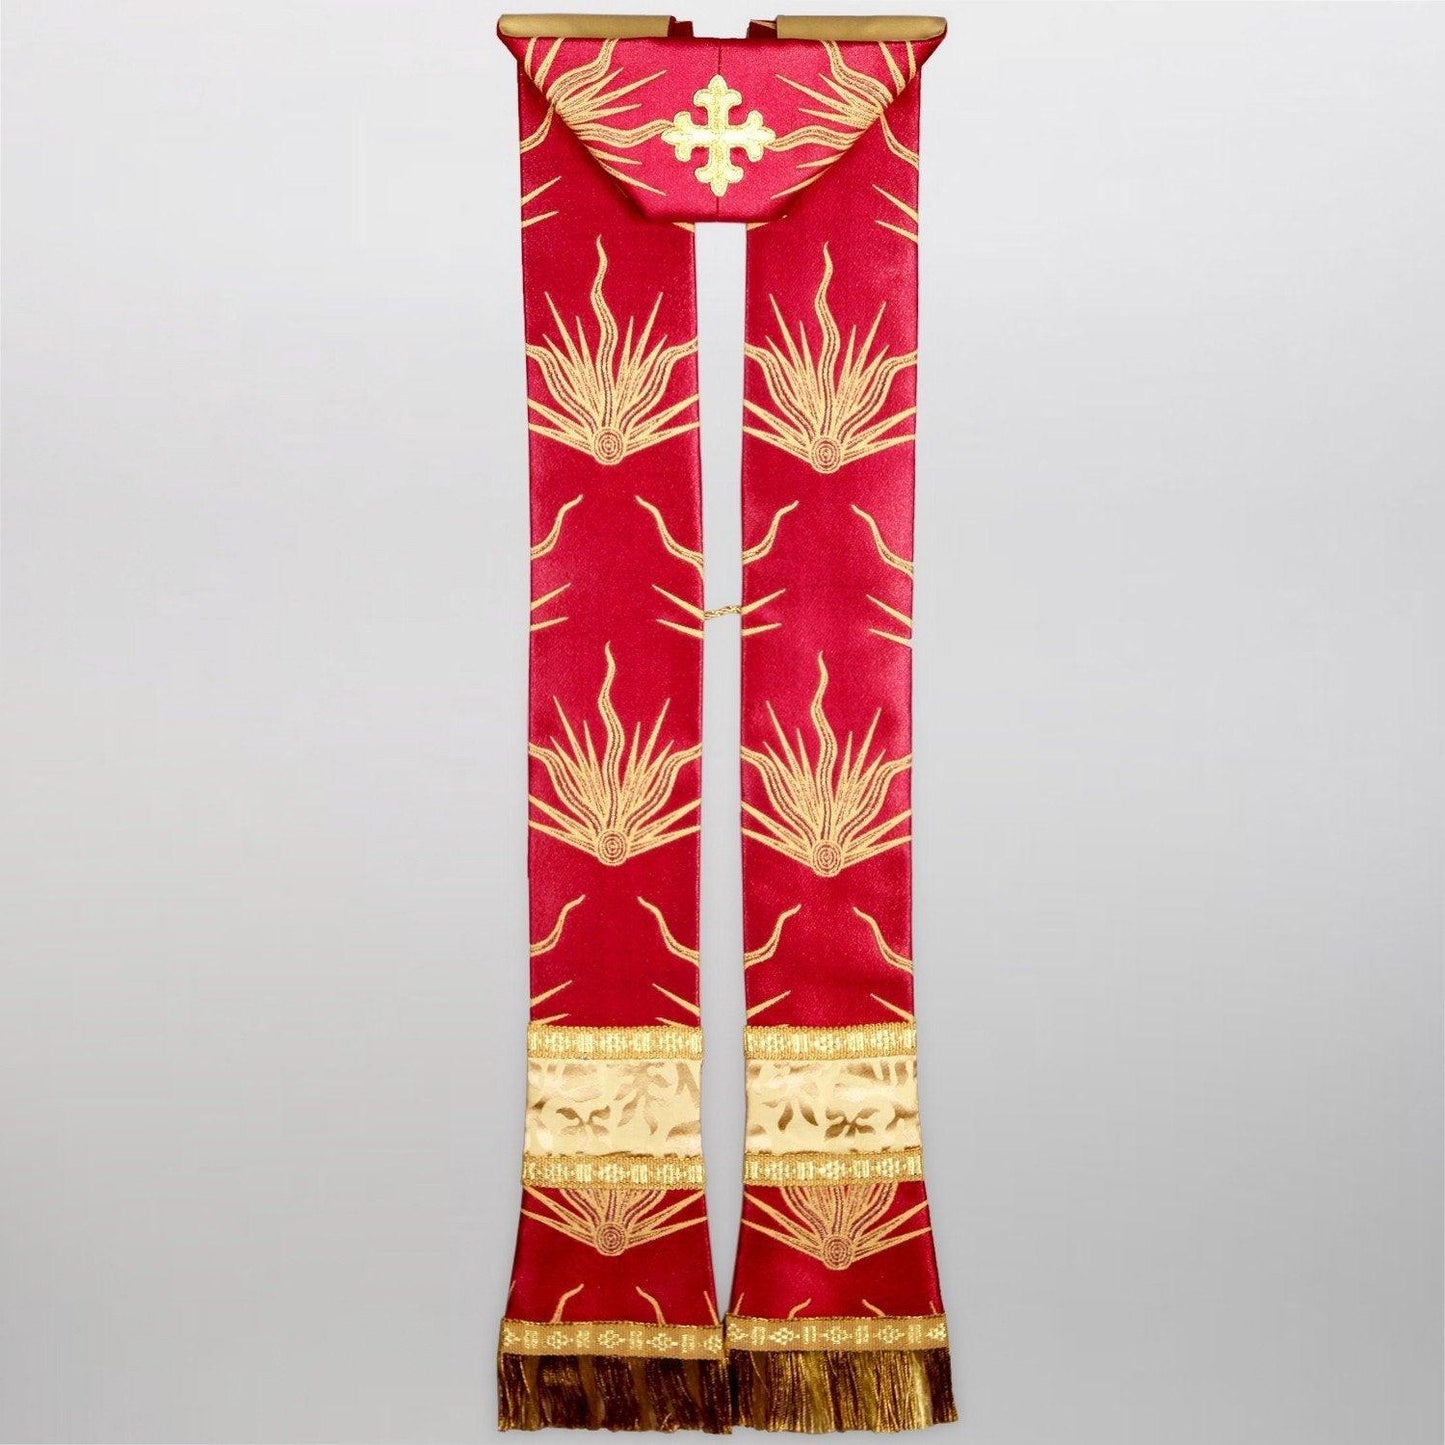 Gothic Stole in Red Pentecost Brocade - Watts & Co. (international)